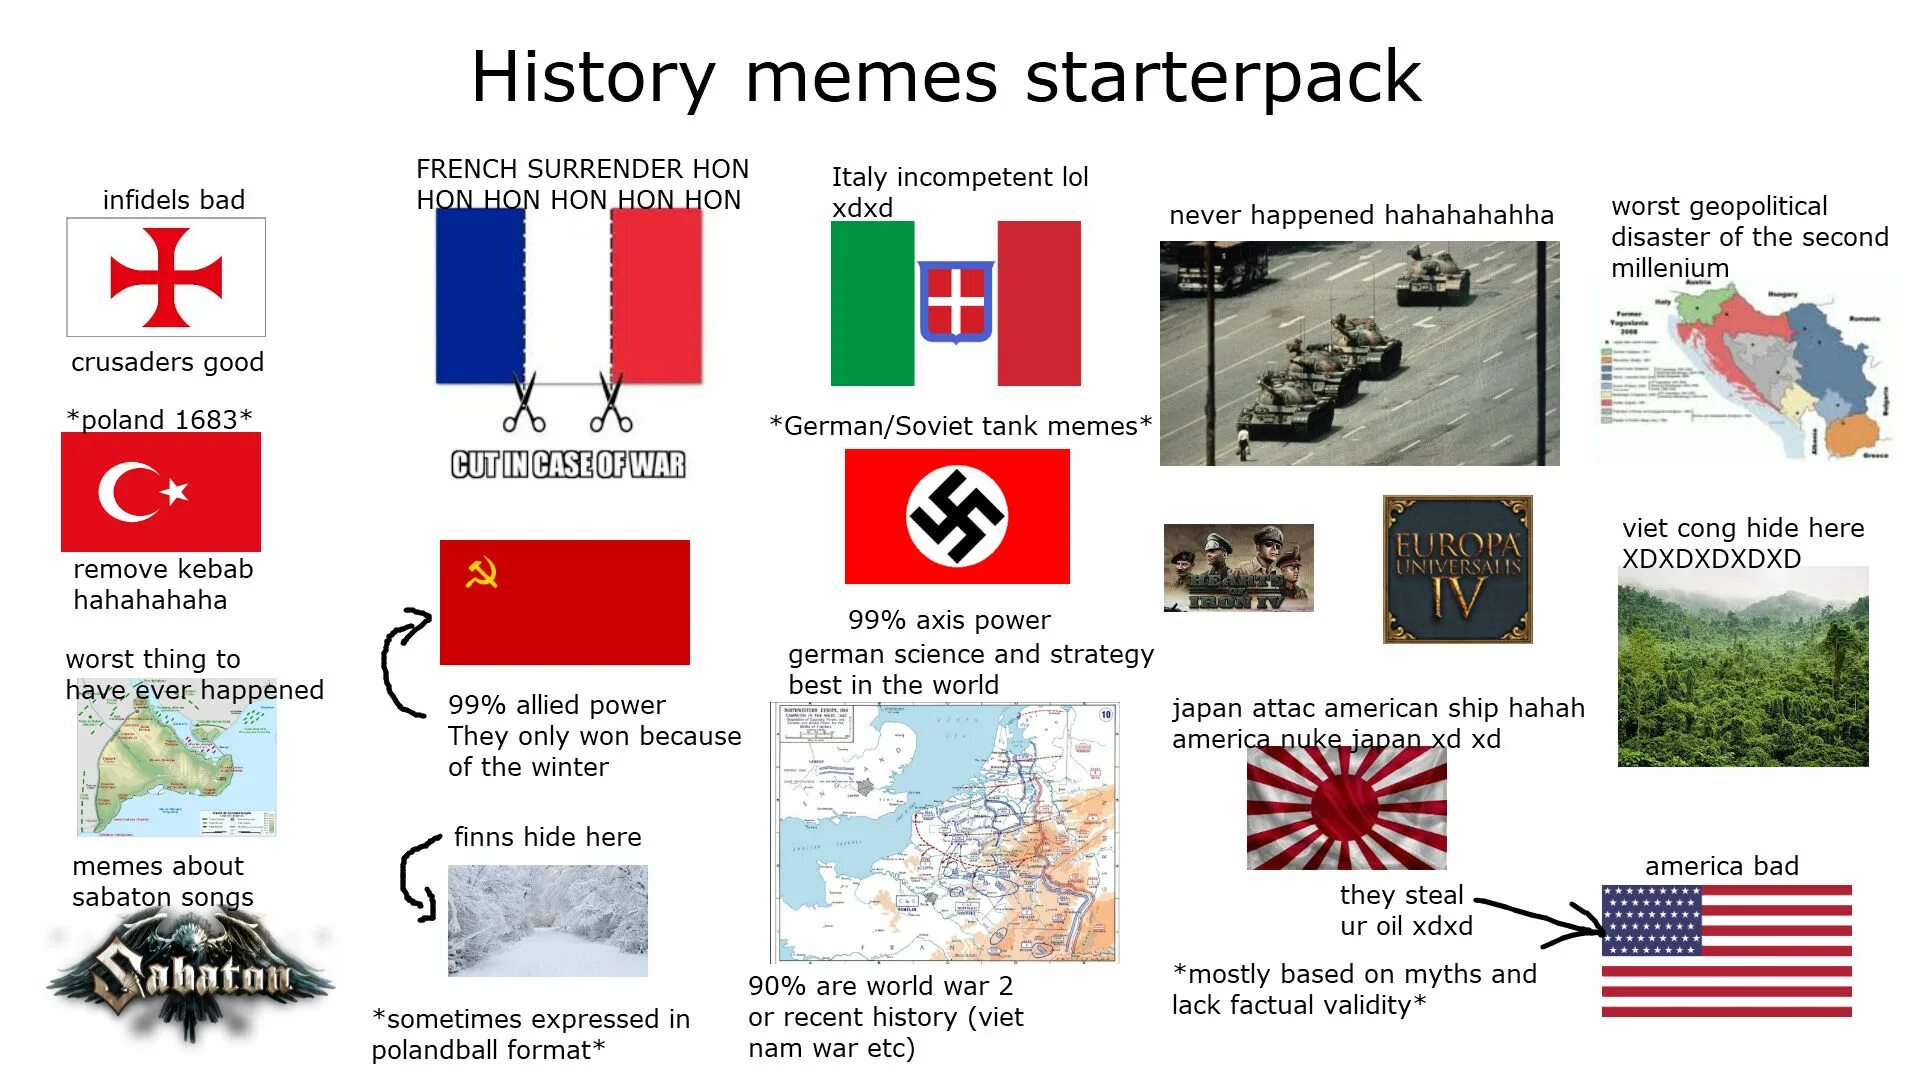 Second happened. XDXDXDXDXD. French Surrender. Ww2 German Roblox. XDXDXDXDXD варвар Мем.